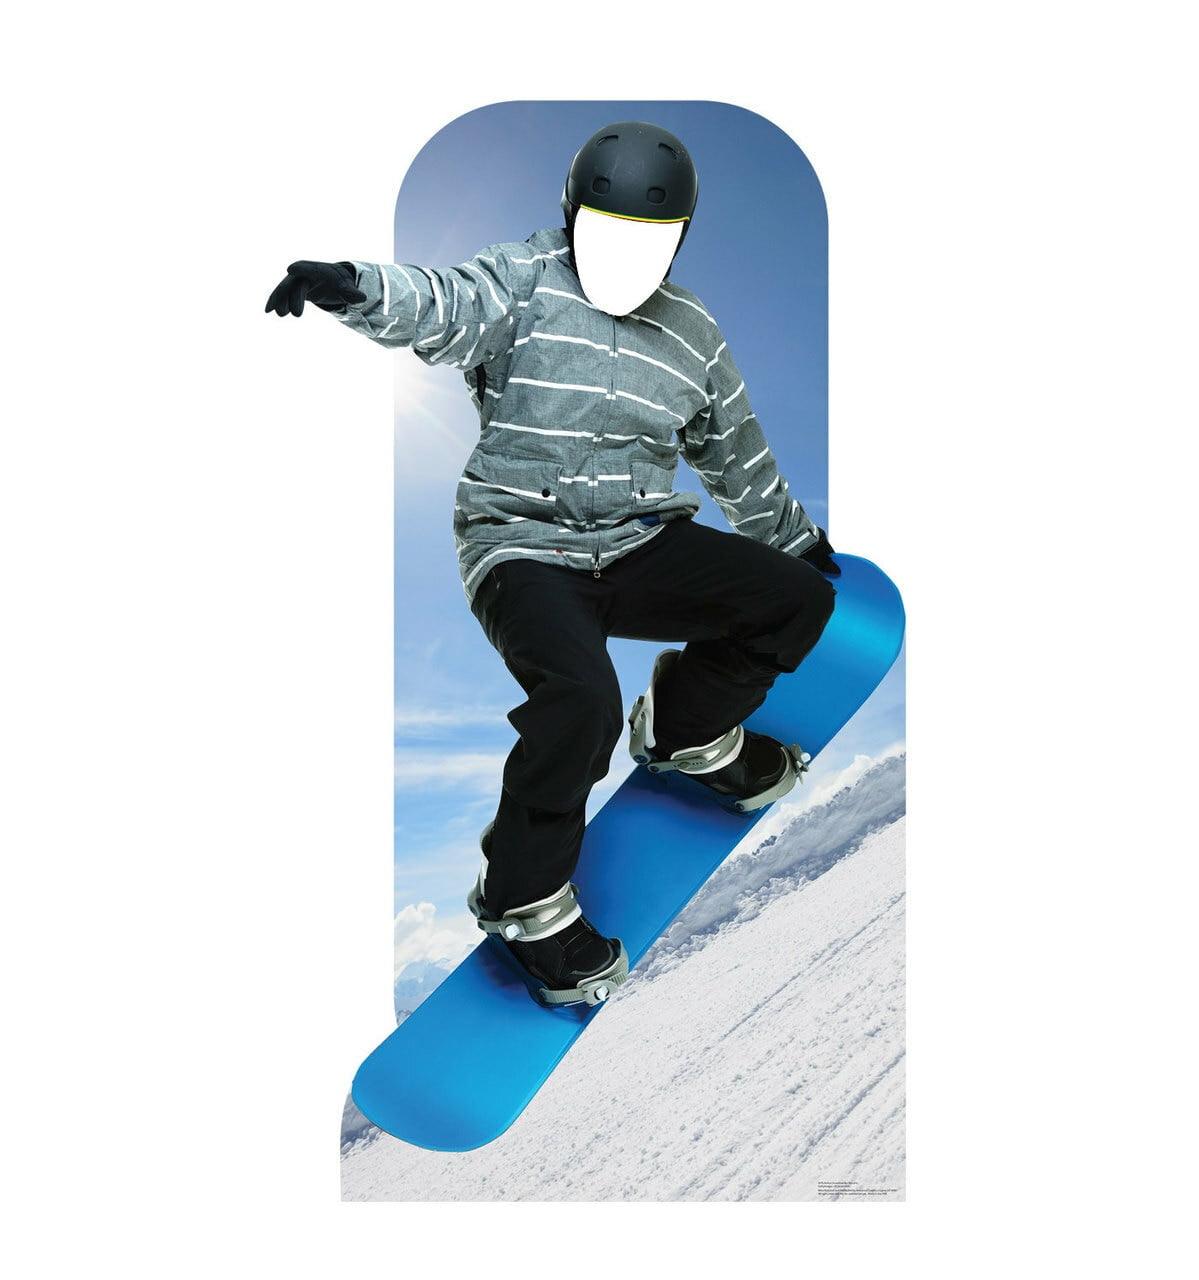 Picture of Advanced Graphics 2676 66 x 39 in. Action Snowboarder Standin Wall Decal